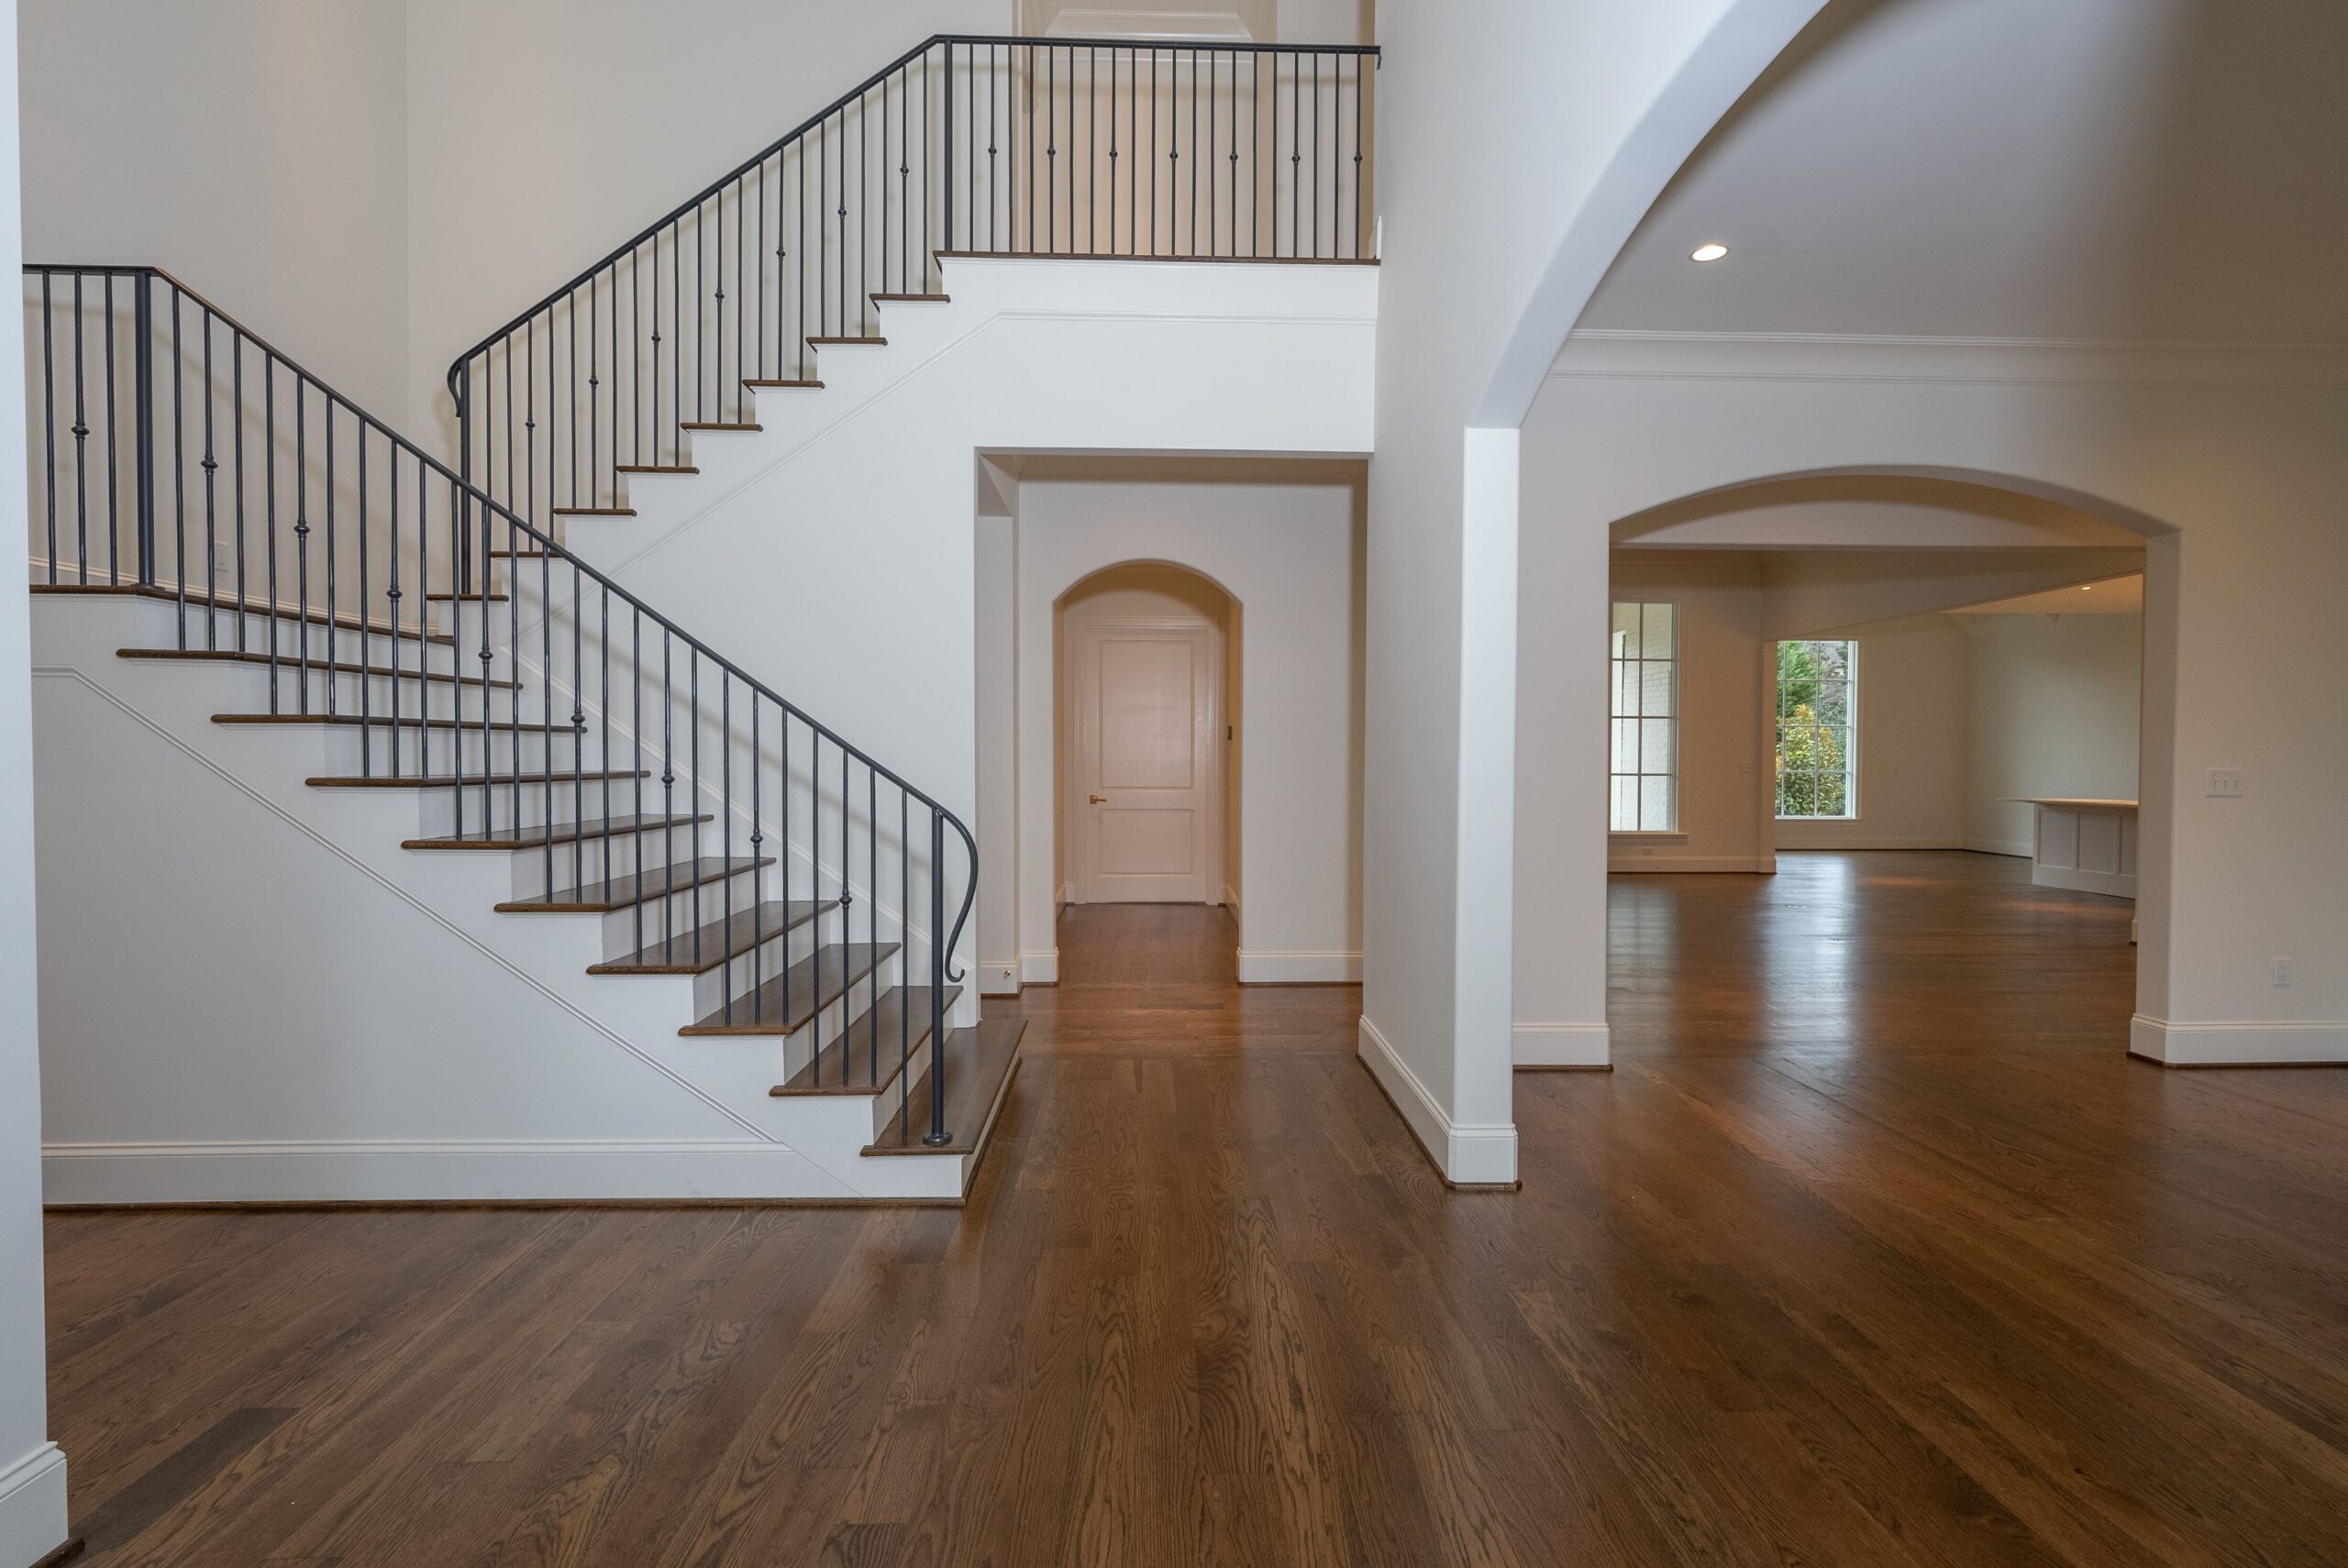 A large open floor plan with stairs leading to the second story.